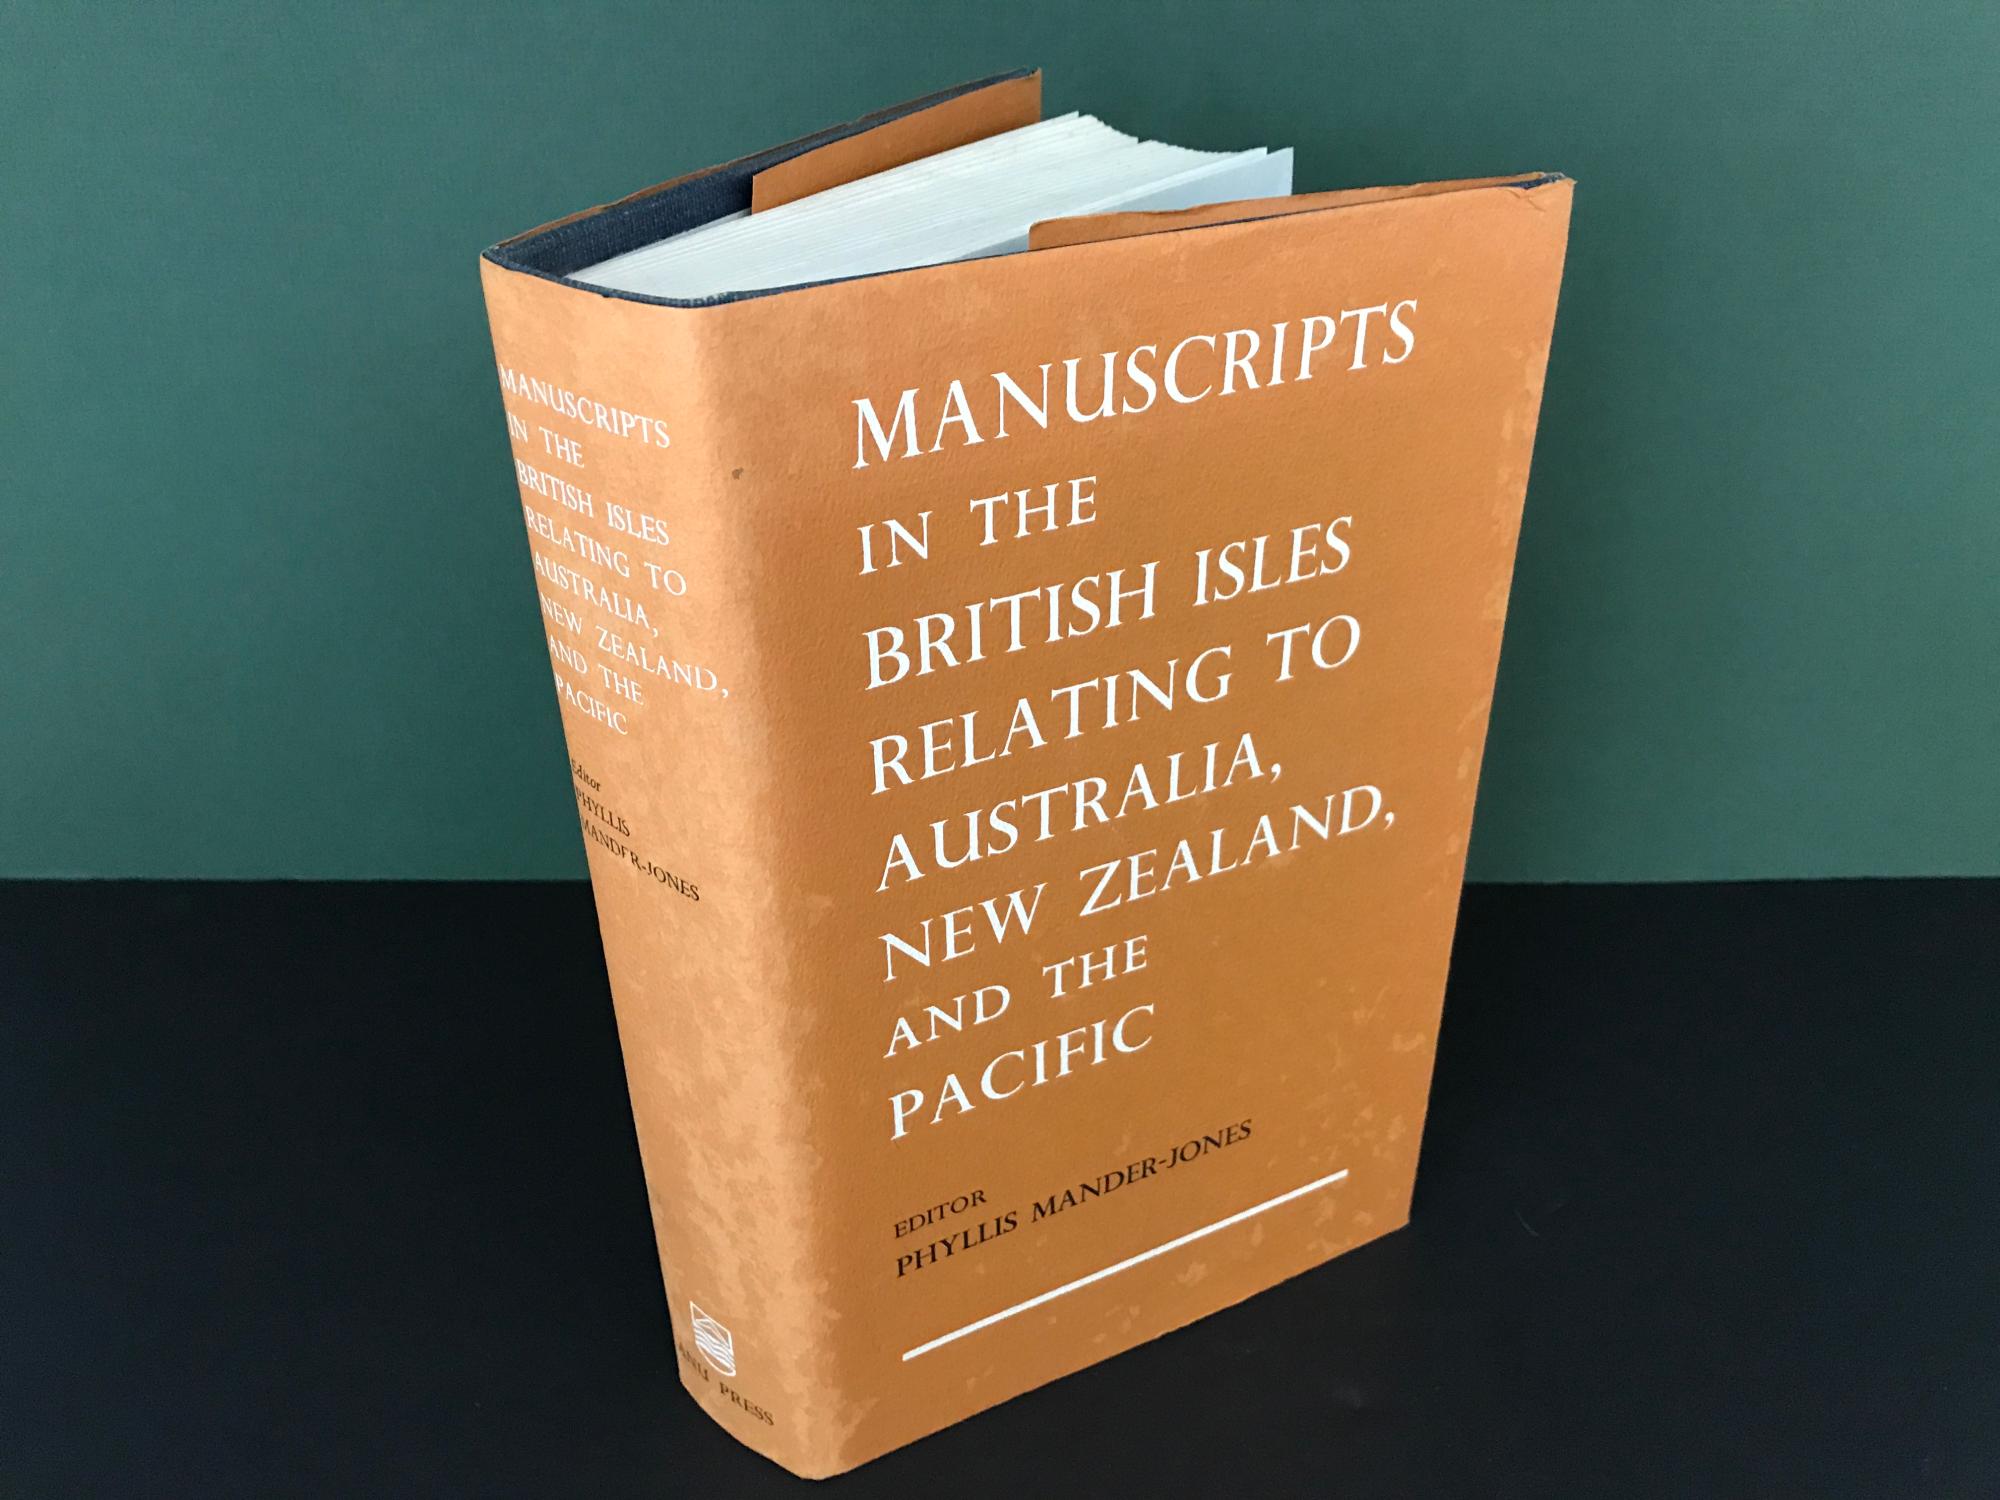 Manuscripts in the British Isles Relating to Australia, New Zealand, and the...